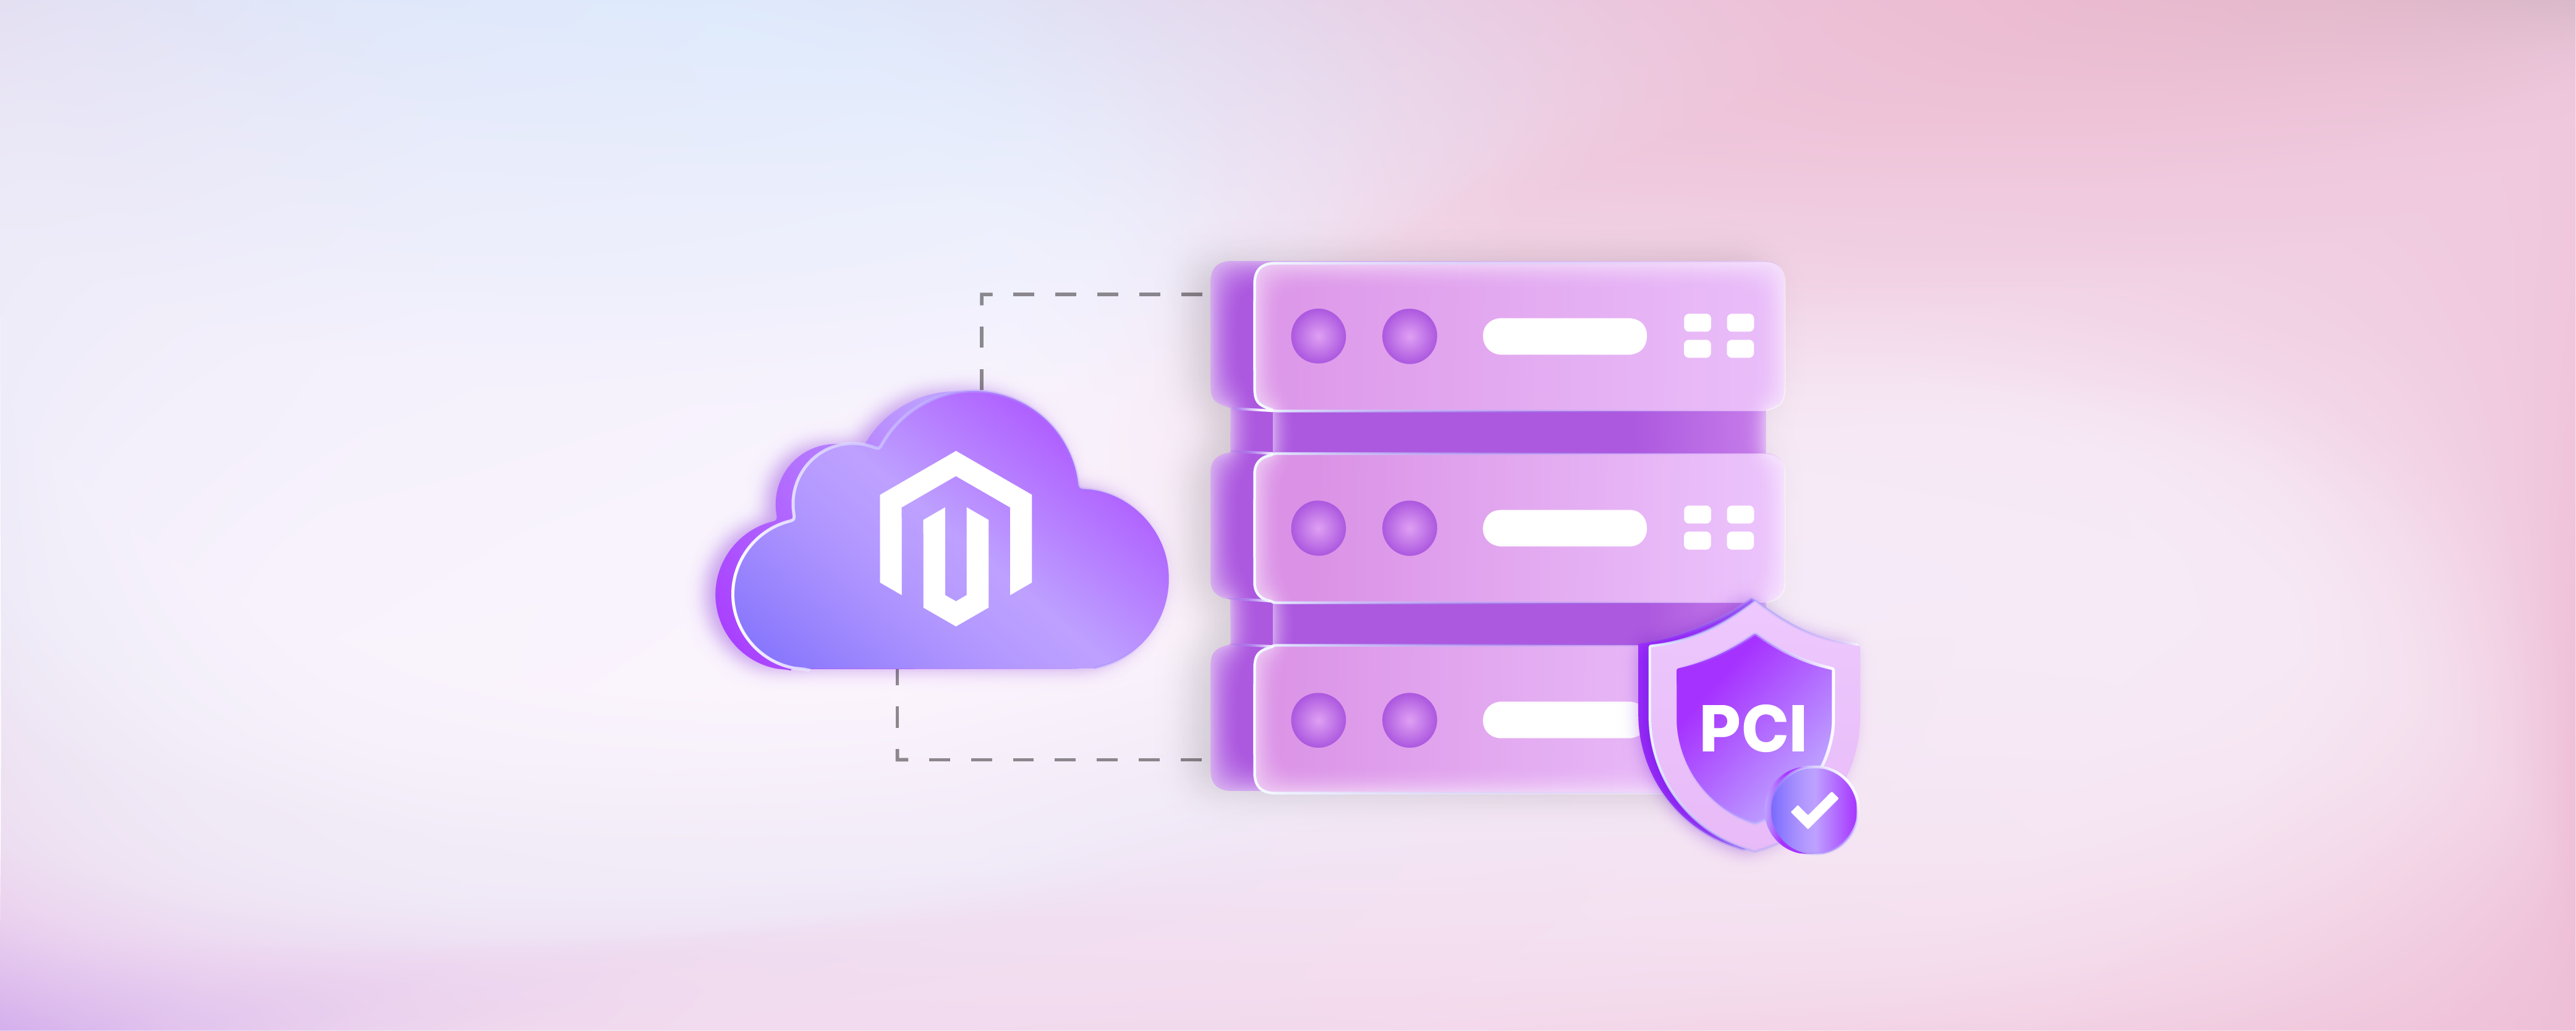 PCI Magento Hosting: 11 Practices for a PCI-Compliant Store